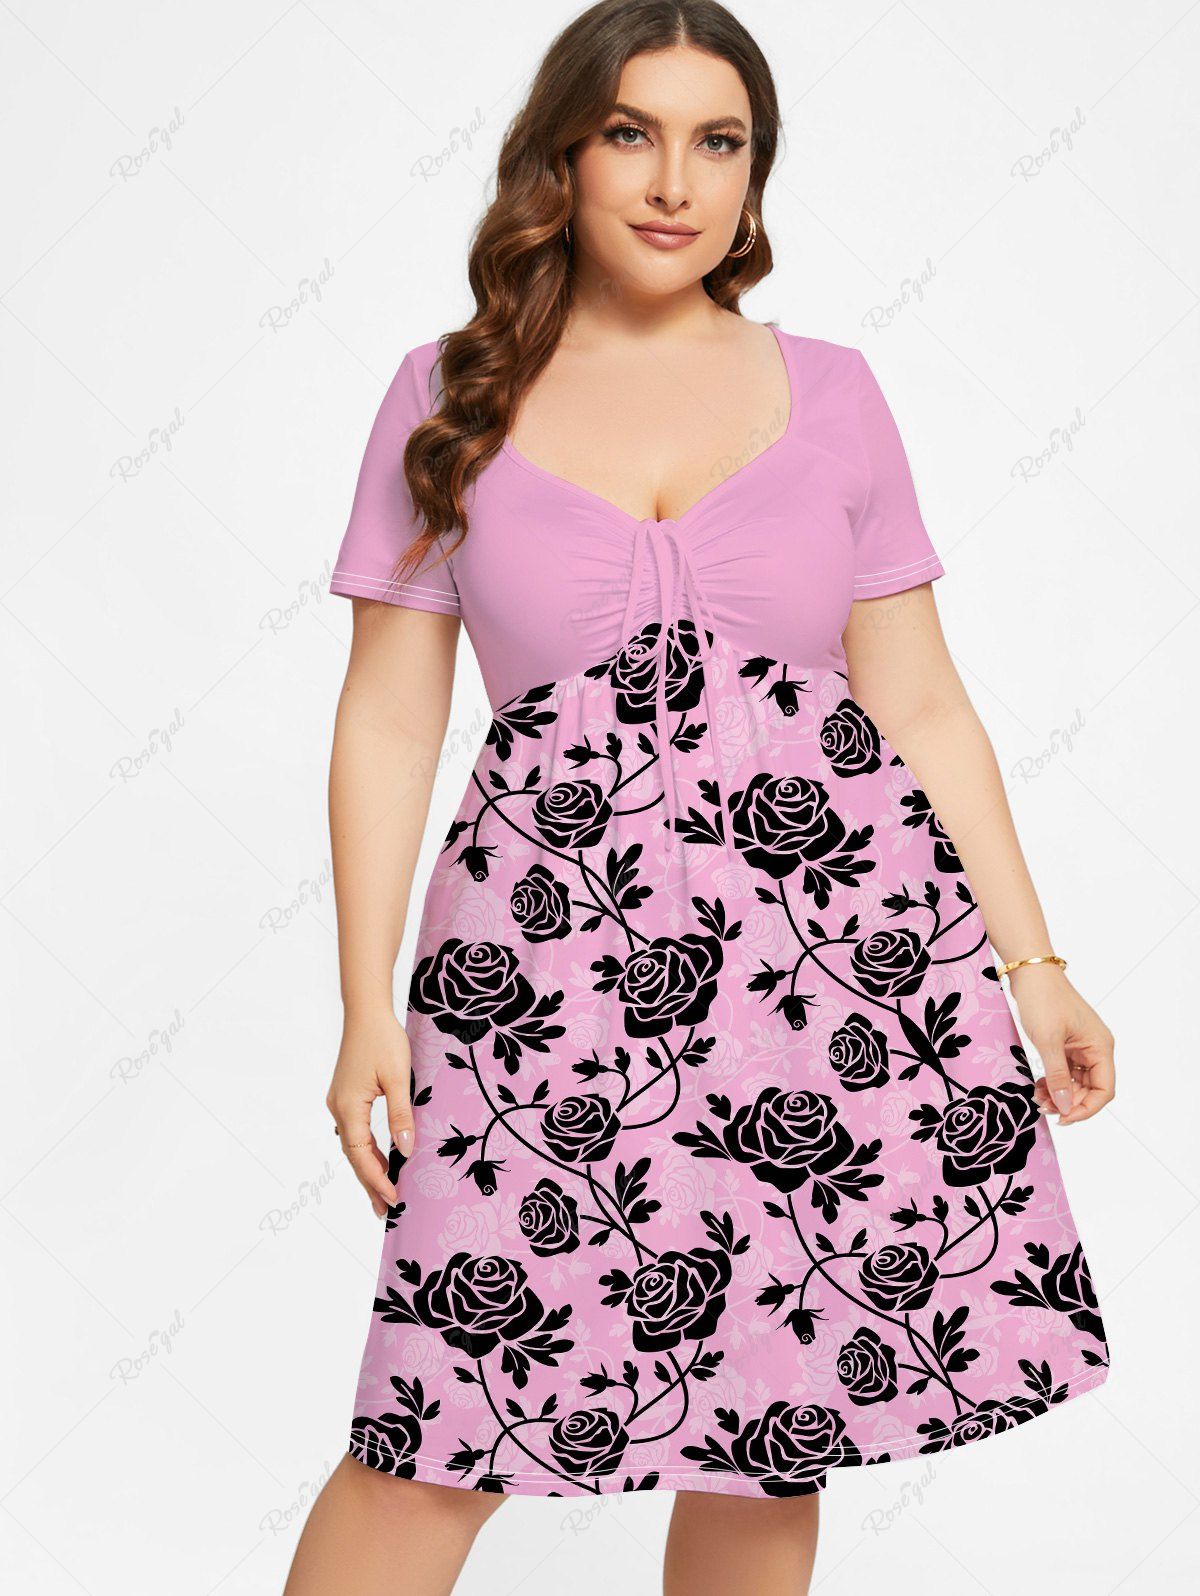 New Plus Size Flower Print Cinched Dress  